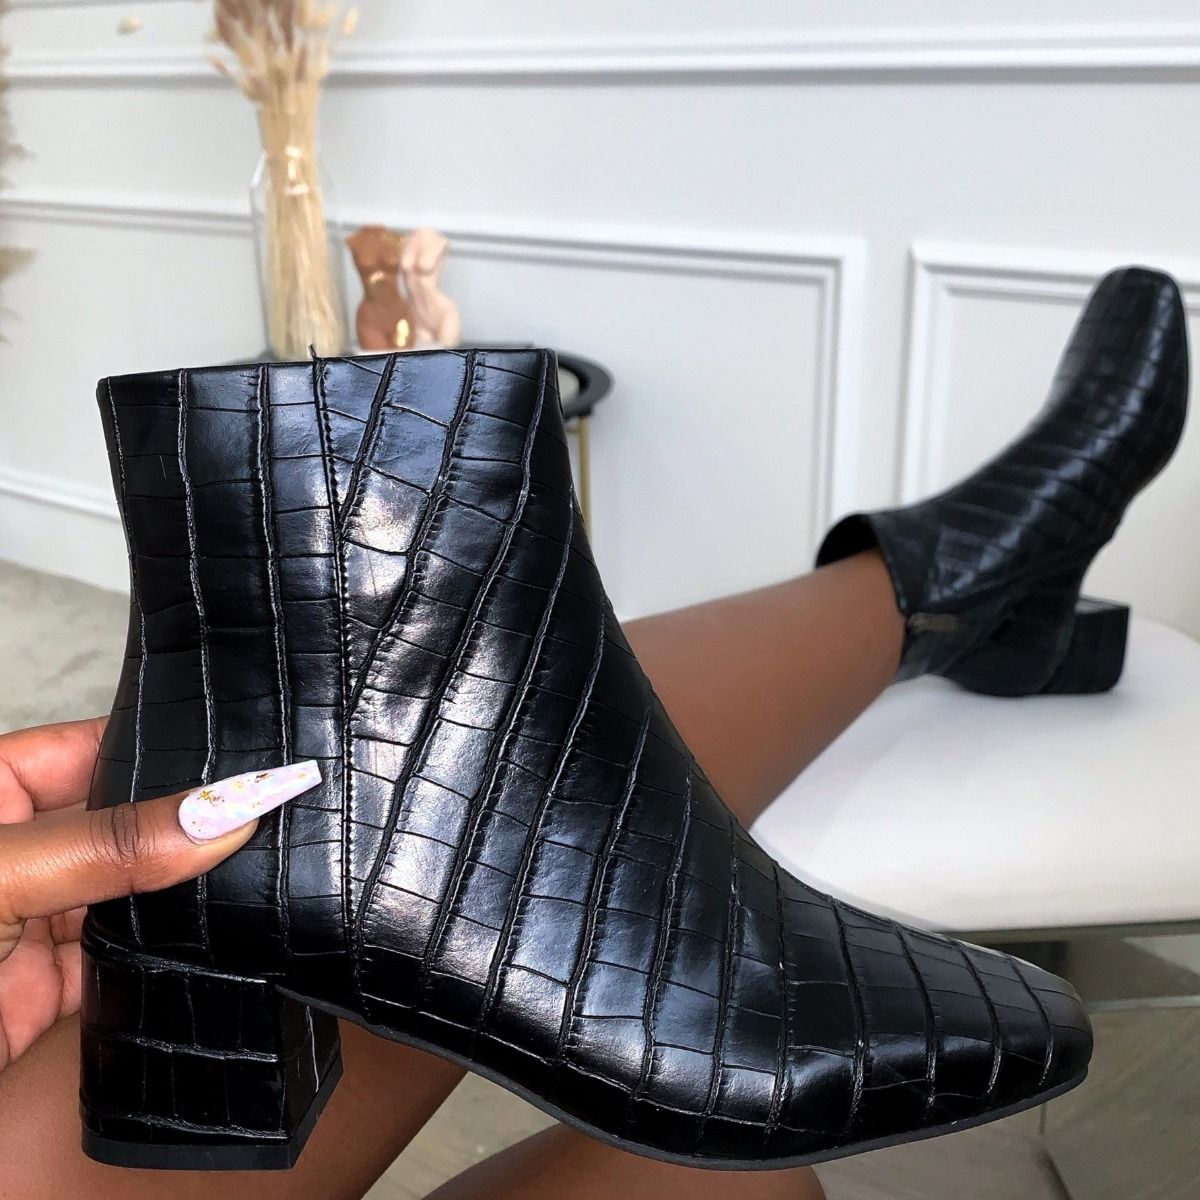 mock croc print leather ankle boots